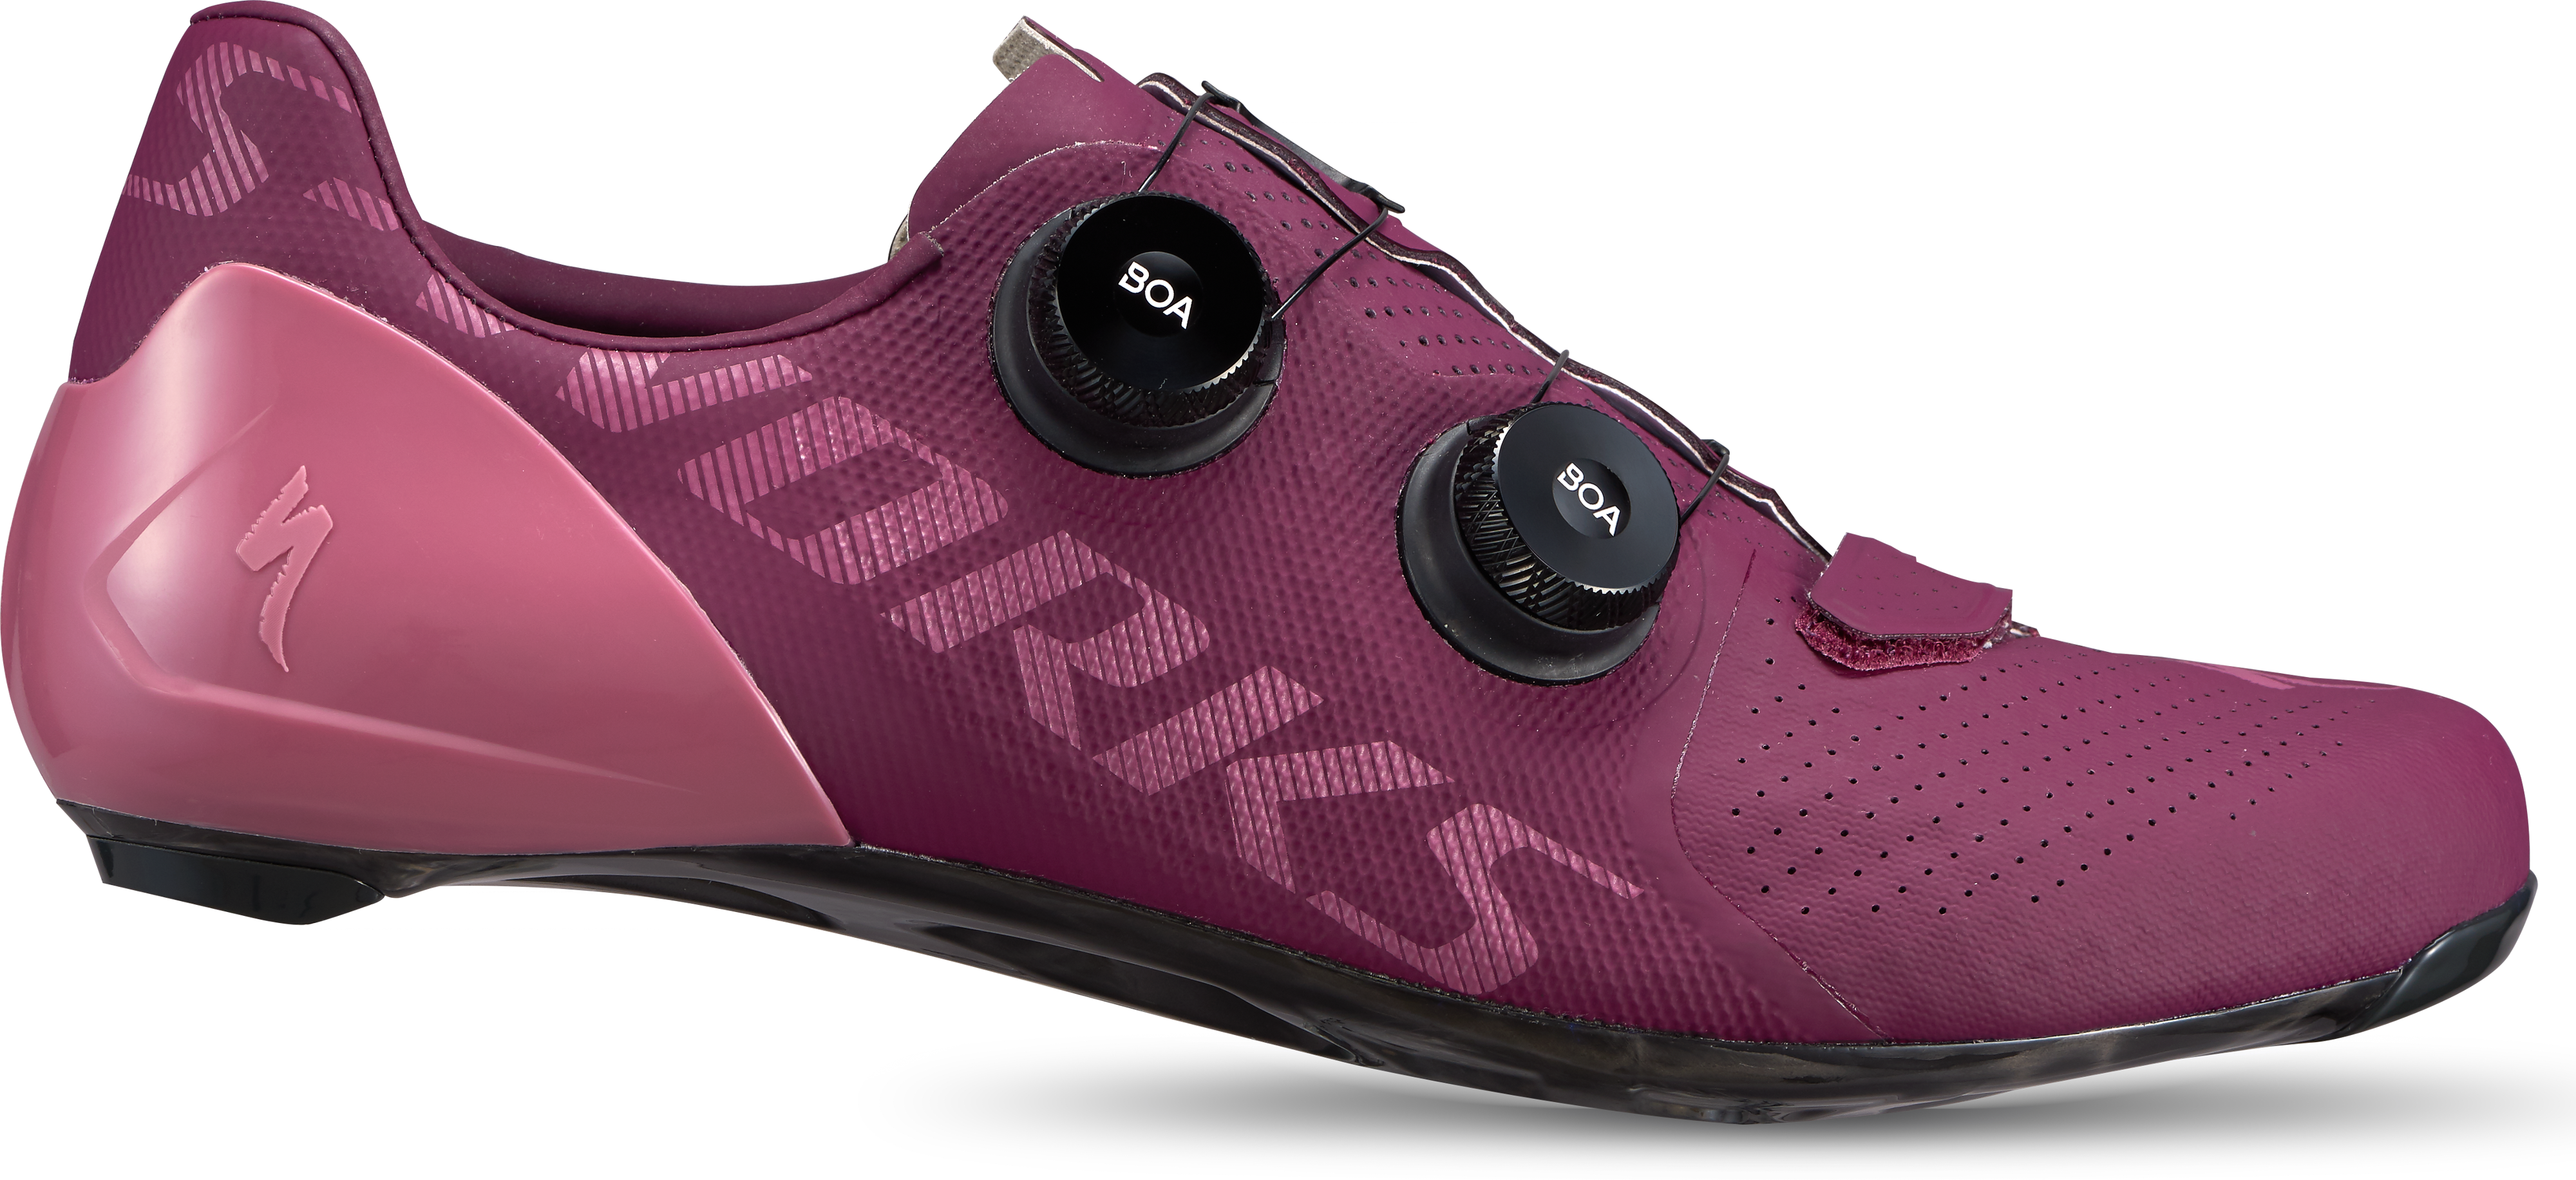 S-WORKS 7 ROAD SHOES CAST BERRY 41(41 (26cm) キャストベリー